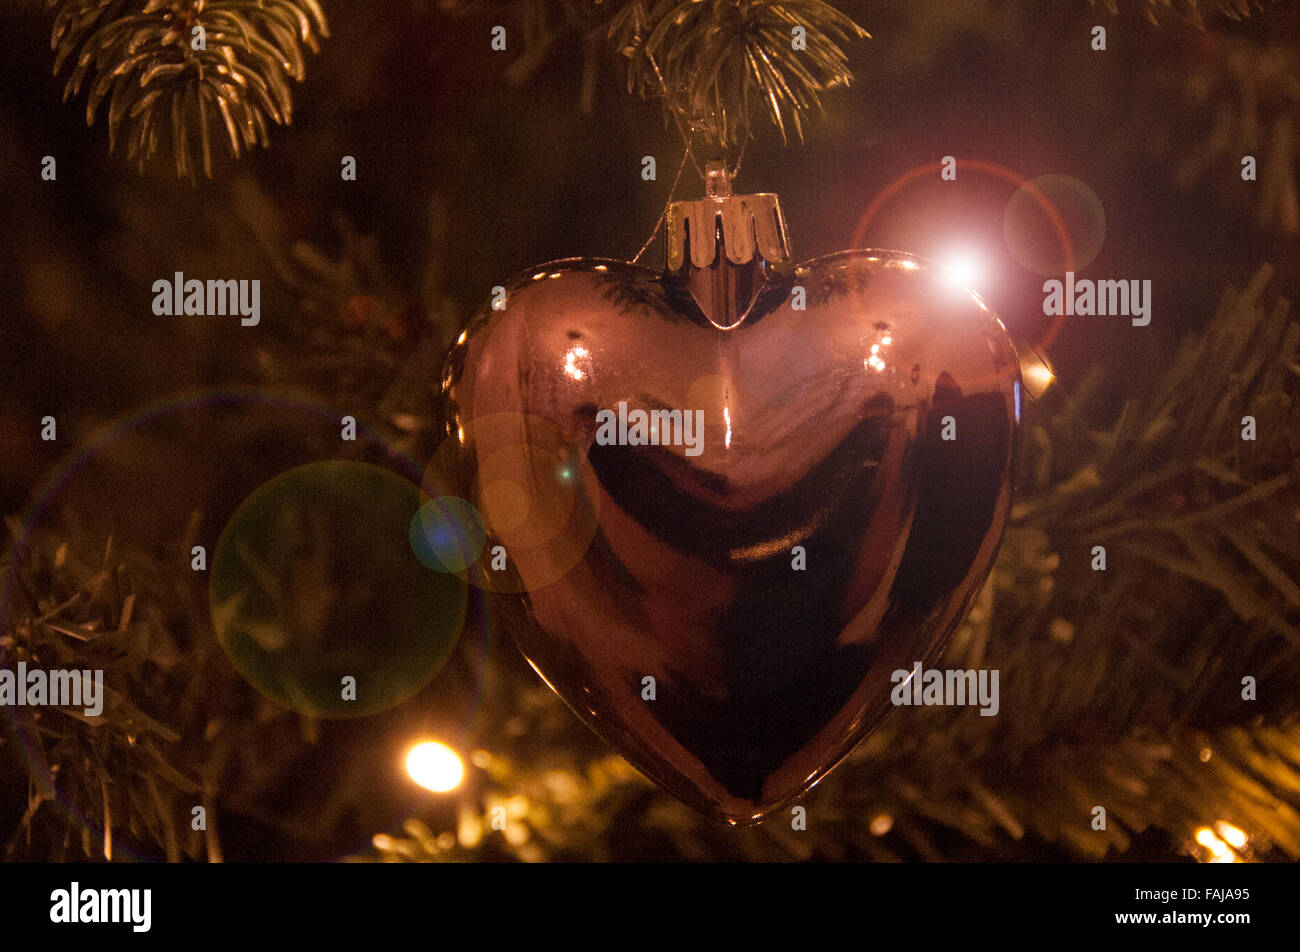 Christmas decorations on a tree with lights Stock Photo